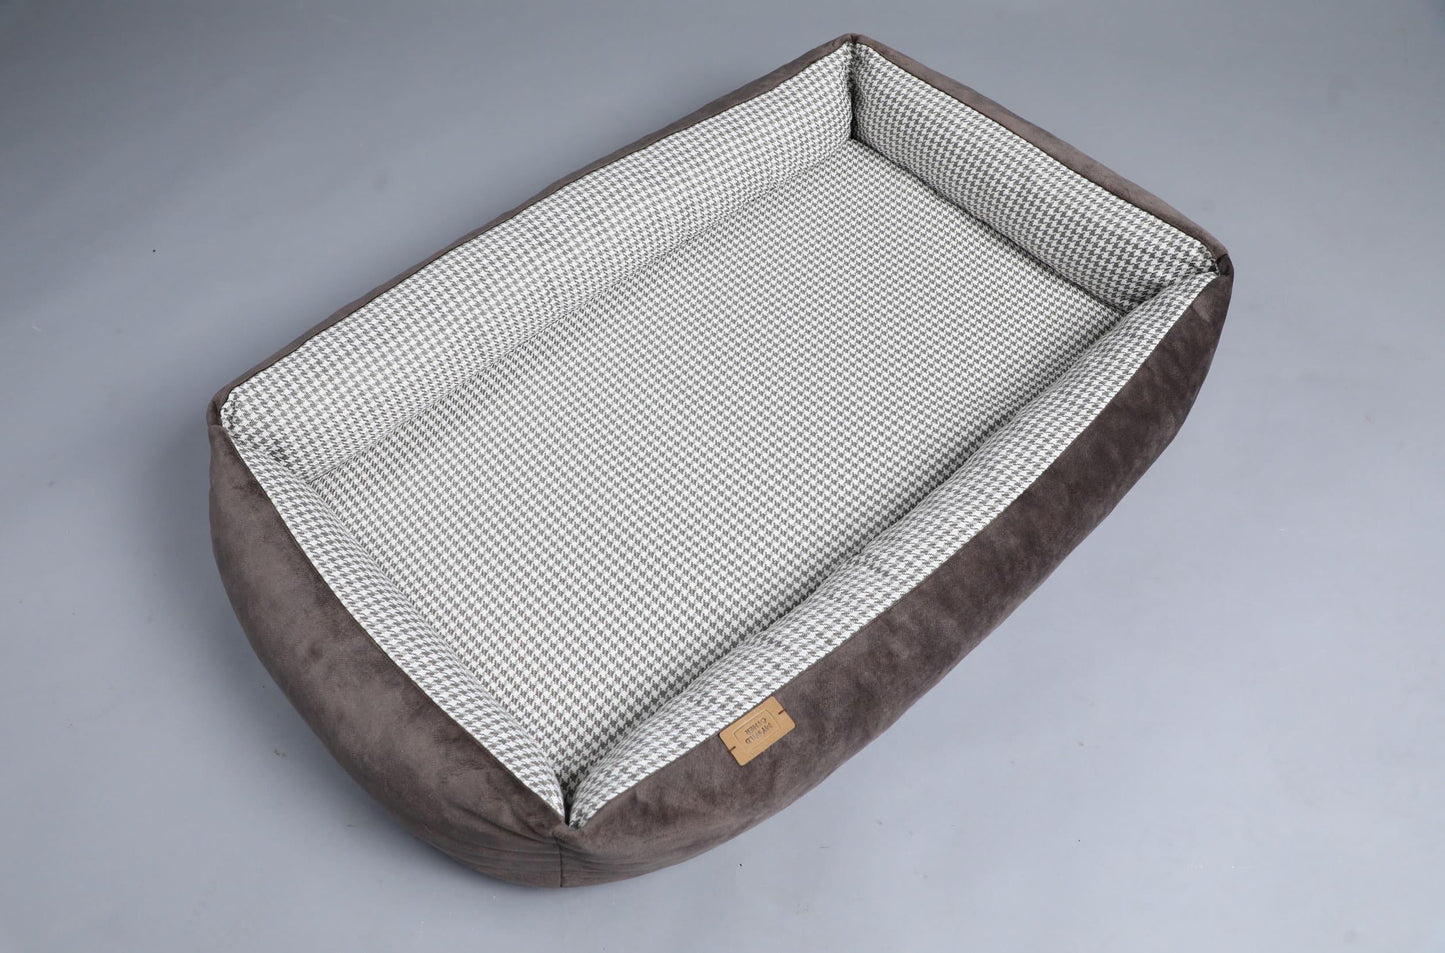 2-sided modern style dog bed. HOUNDSTOOTH+TAUPE - European handmade dog accessories by My Wild Other